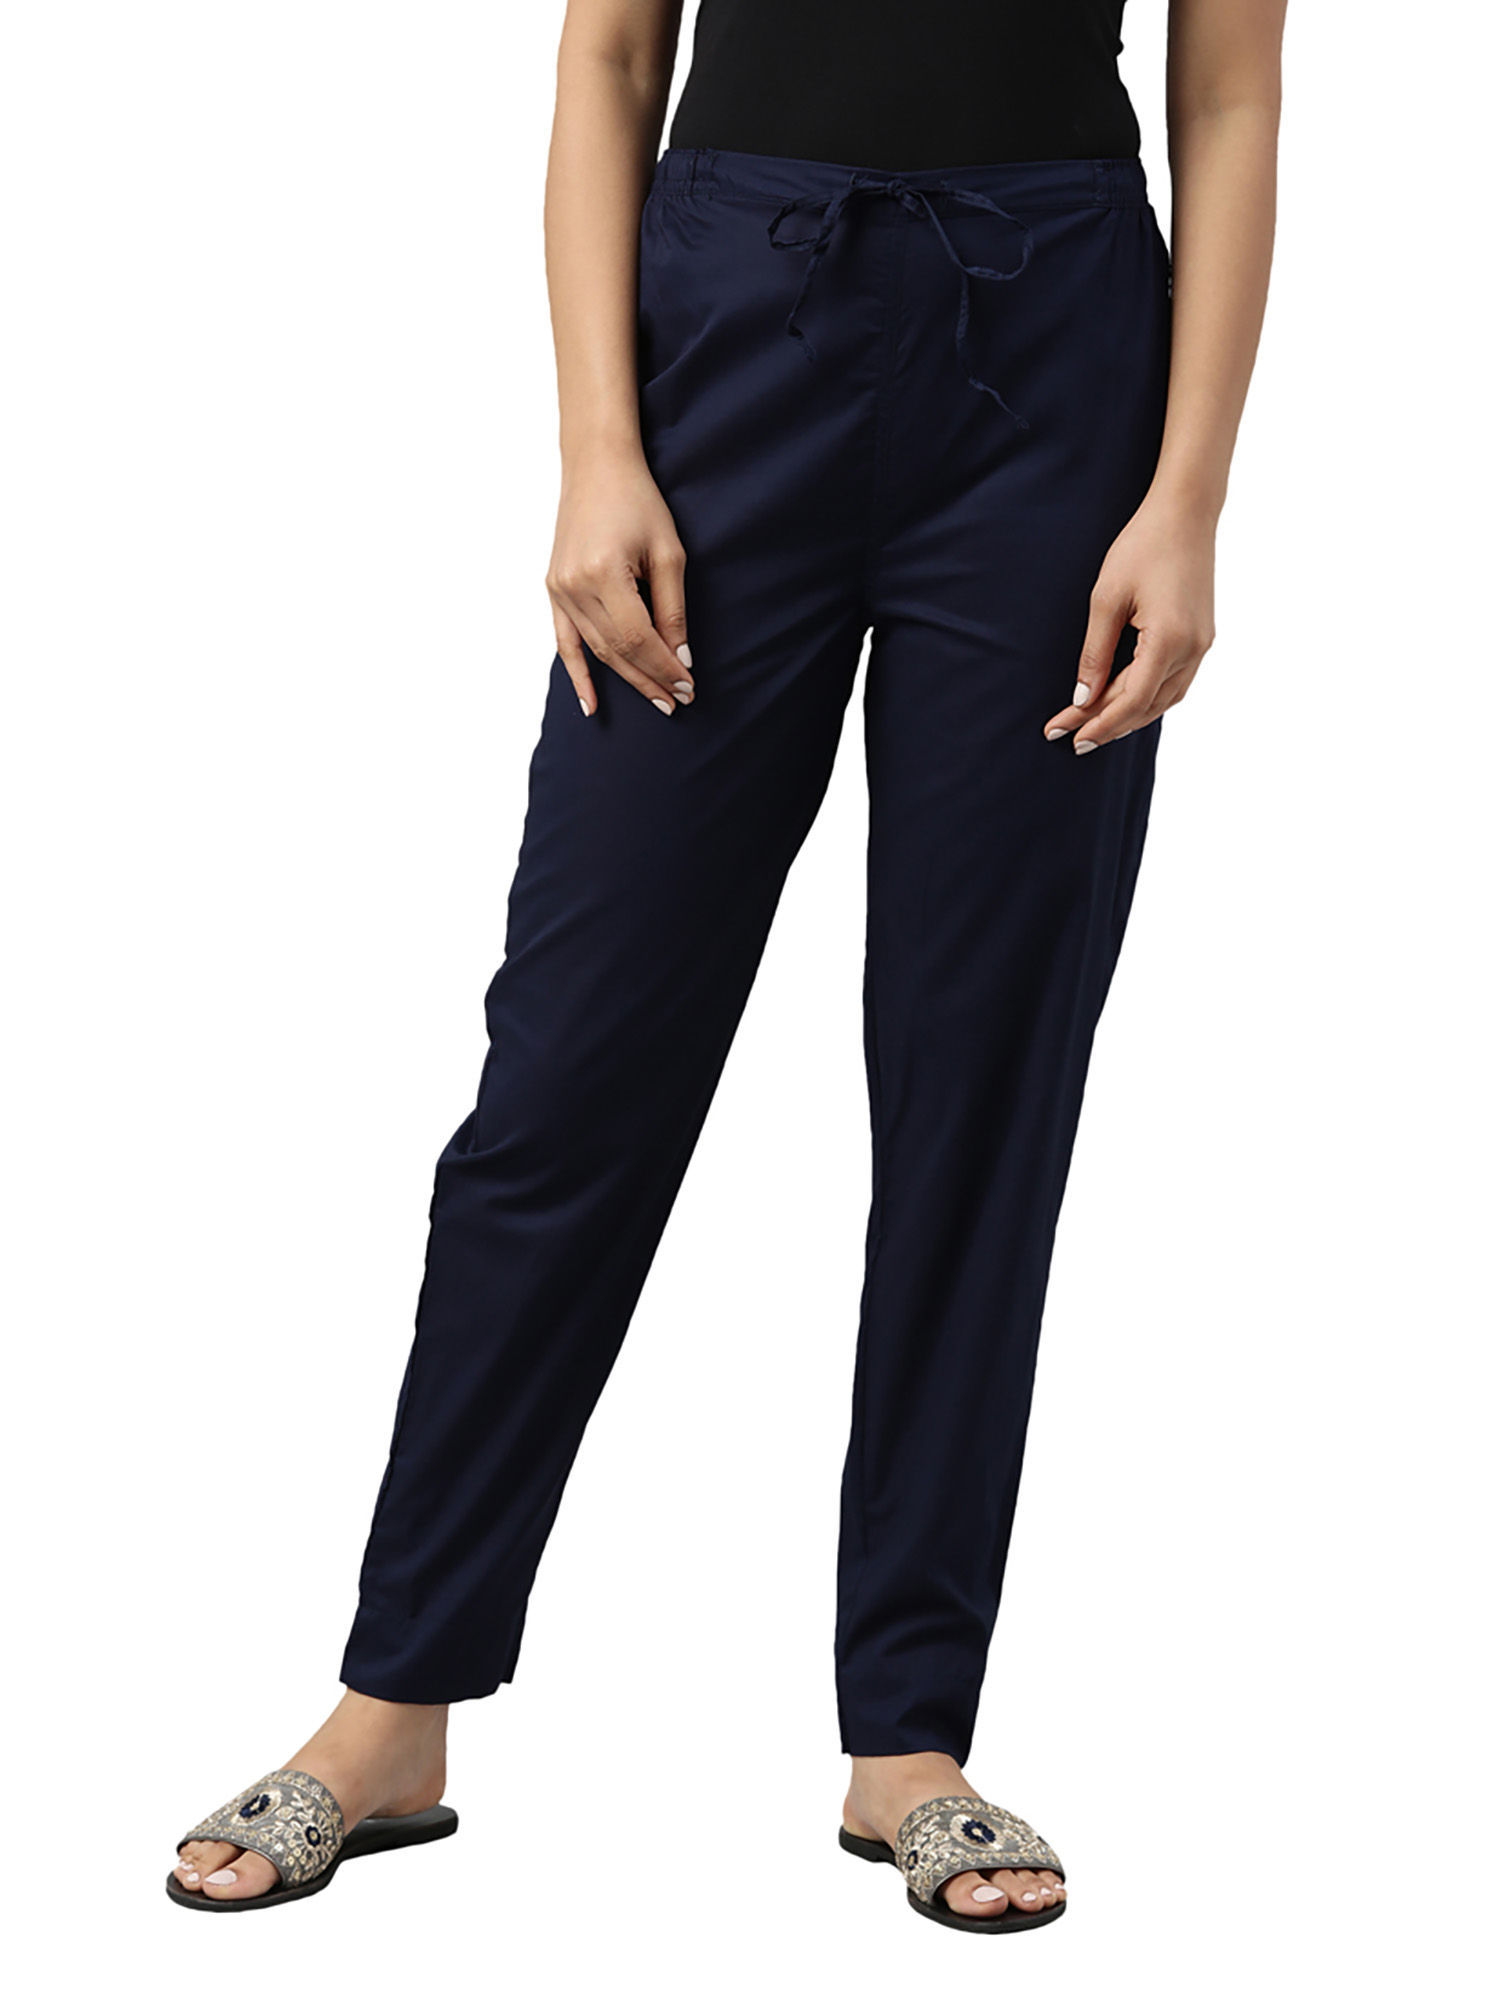 Buy Women Ankle Length Pant Navy Blue Solid Rayon for Best Price, Reviews,  Free Shipping